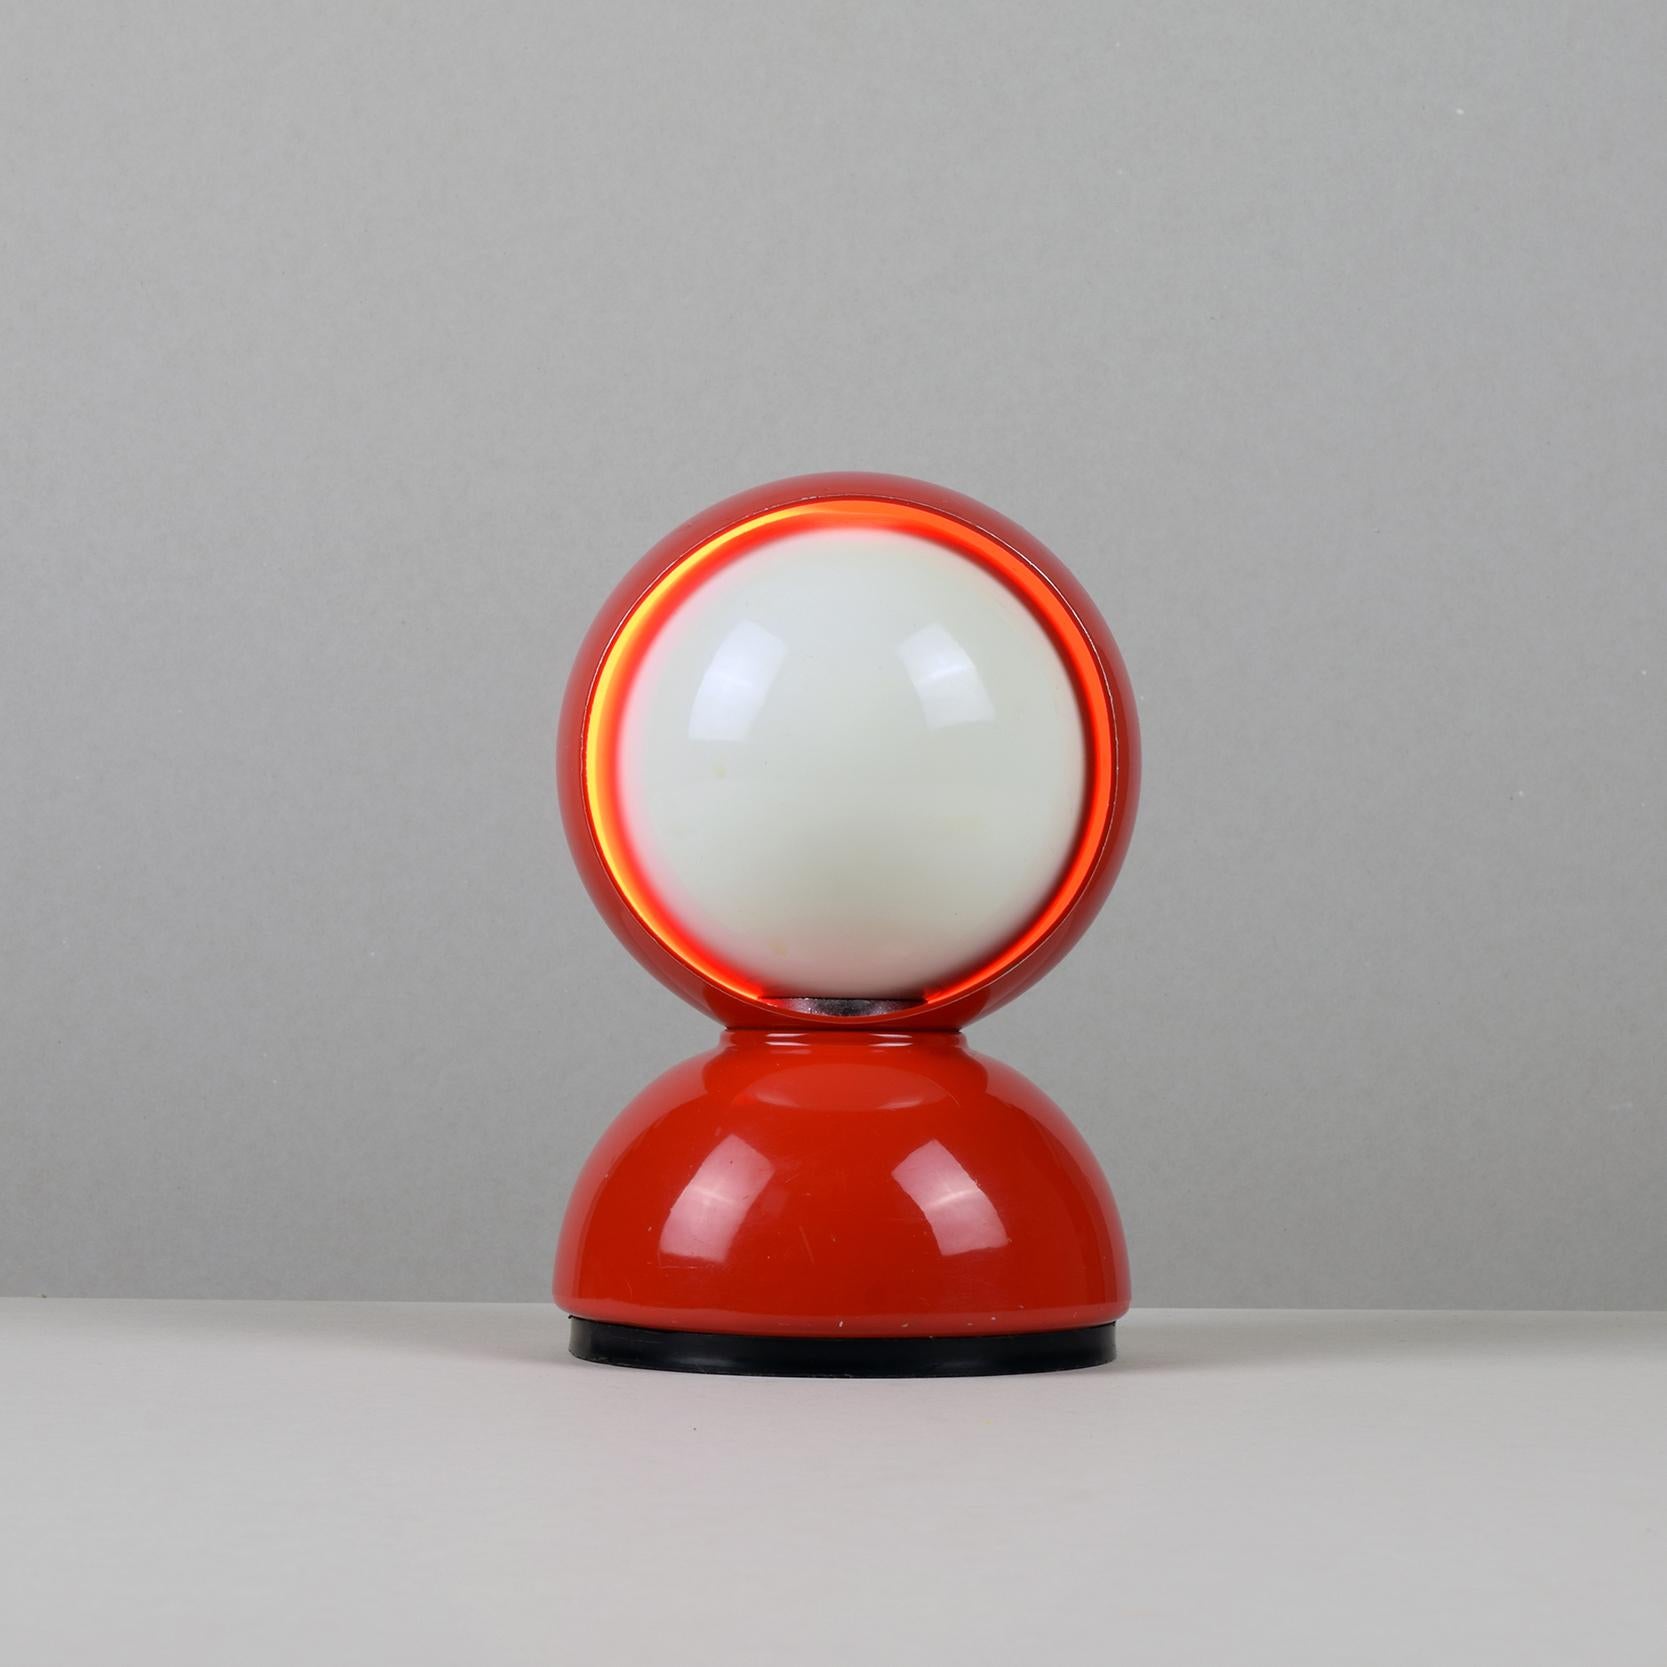 Vico Magistretti (designer)
Artemide (manufacturer), Italy

'Eclisse' (Eclipse) table lamp, designed 1965, this is an early version.

Red painted metal and black plastic.

A good example of this design icon.

Condition: overall impression